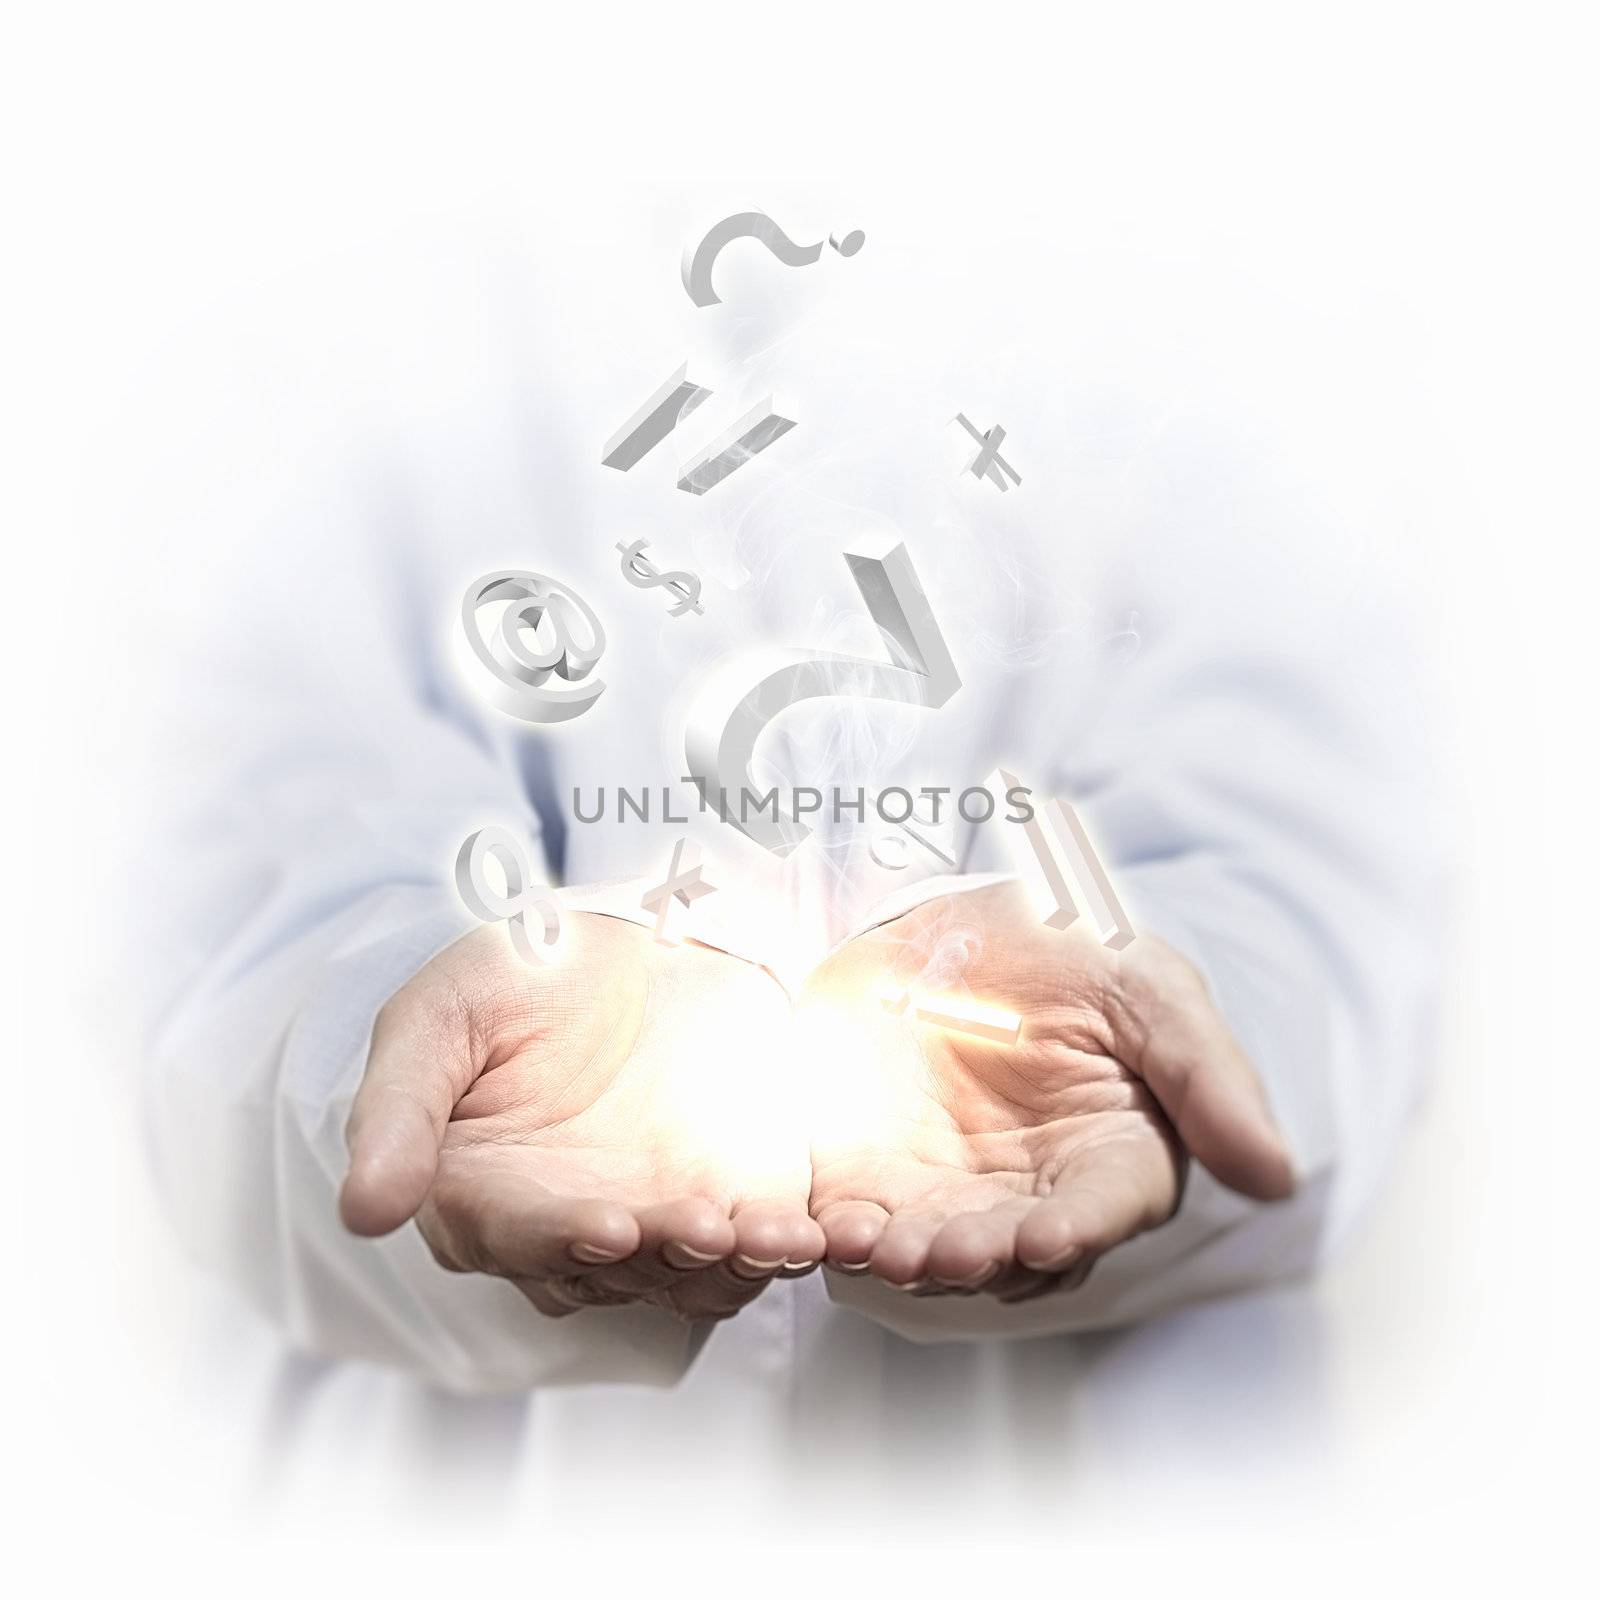 Money concept illustration with human hands and financial symbols